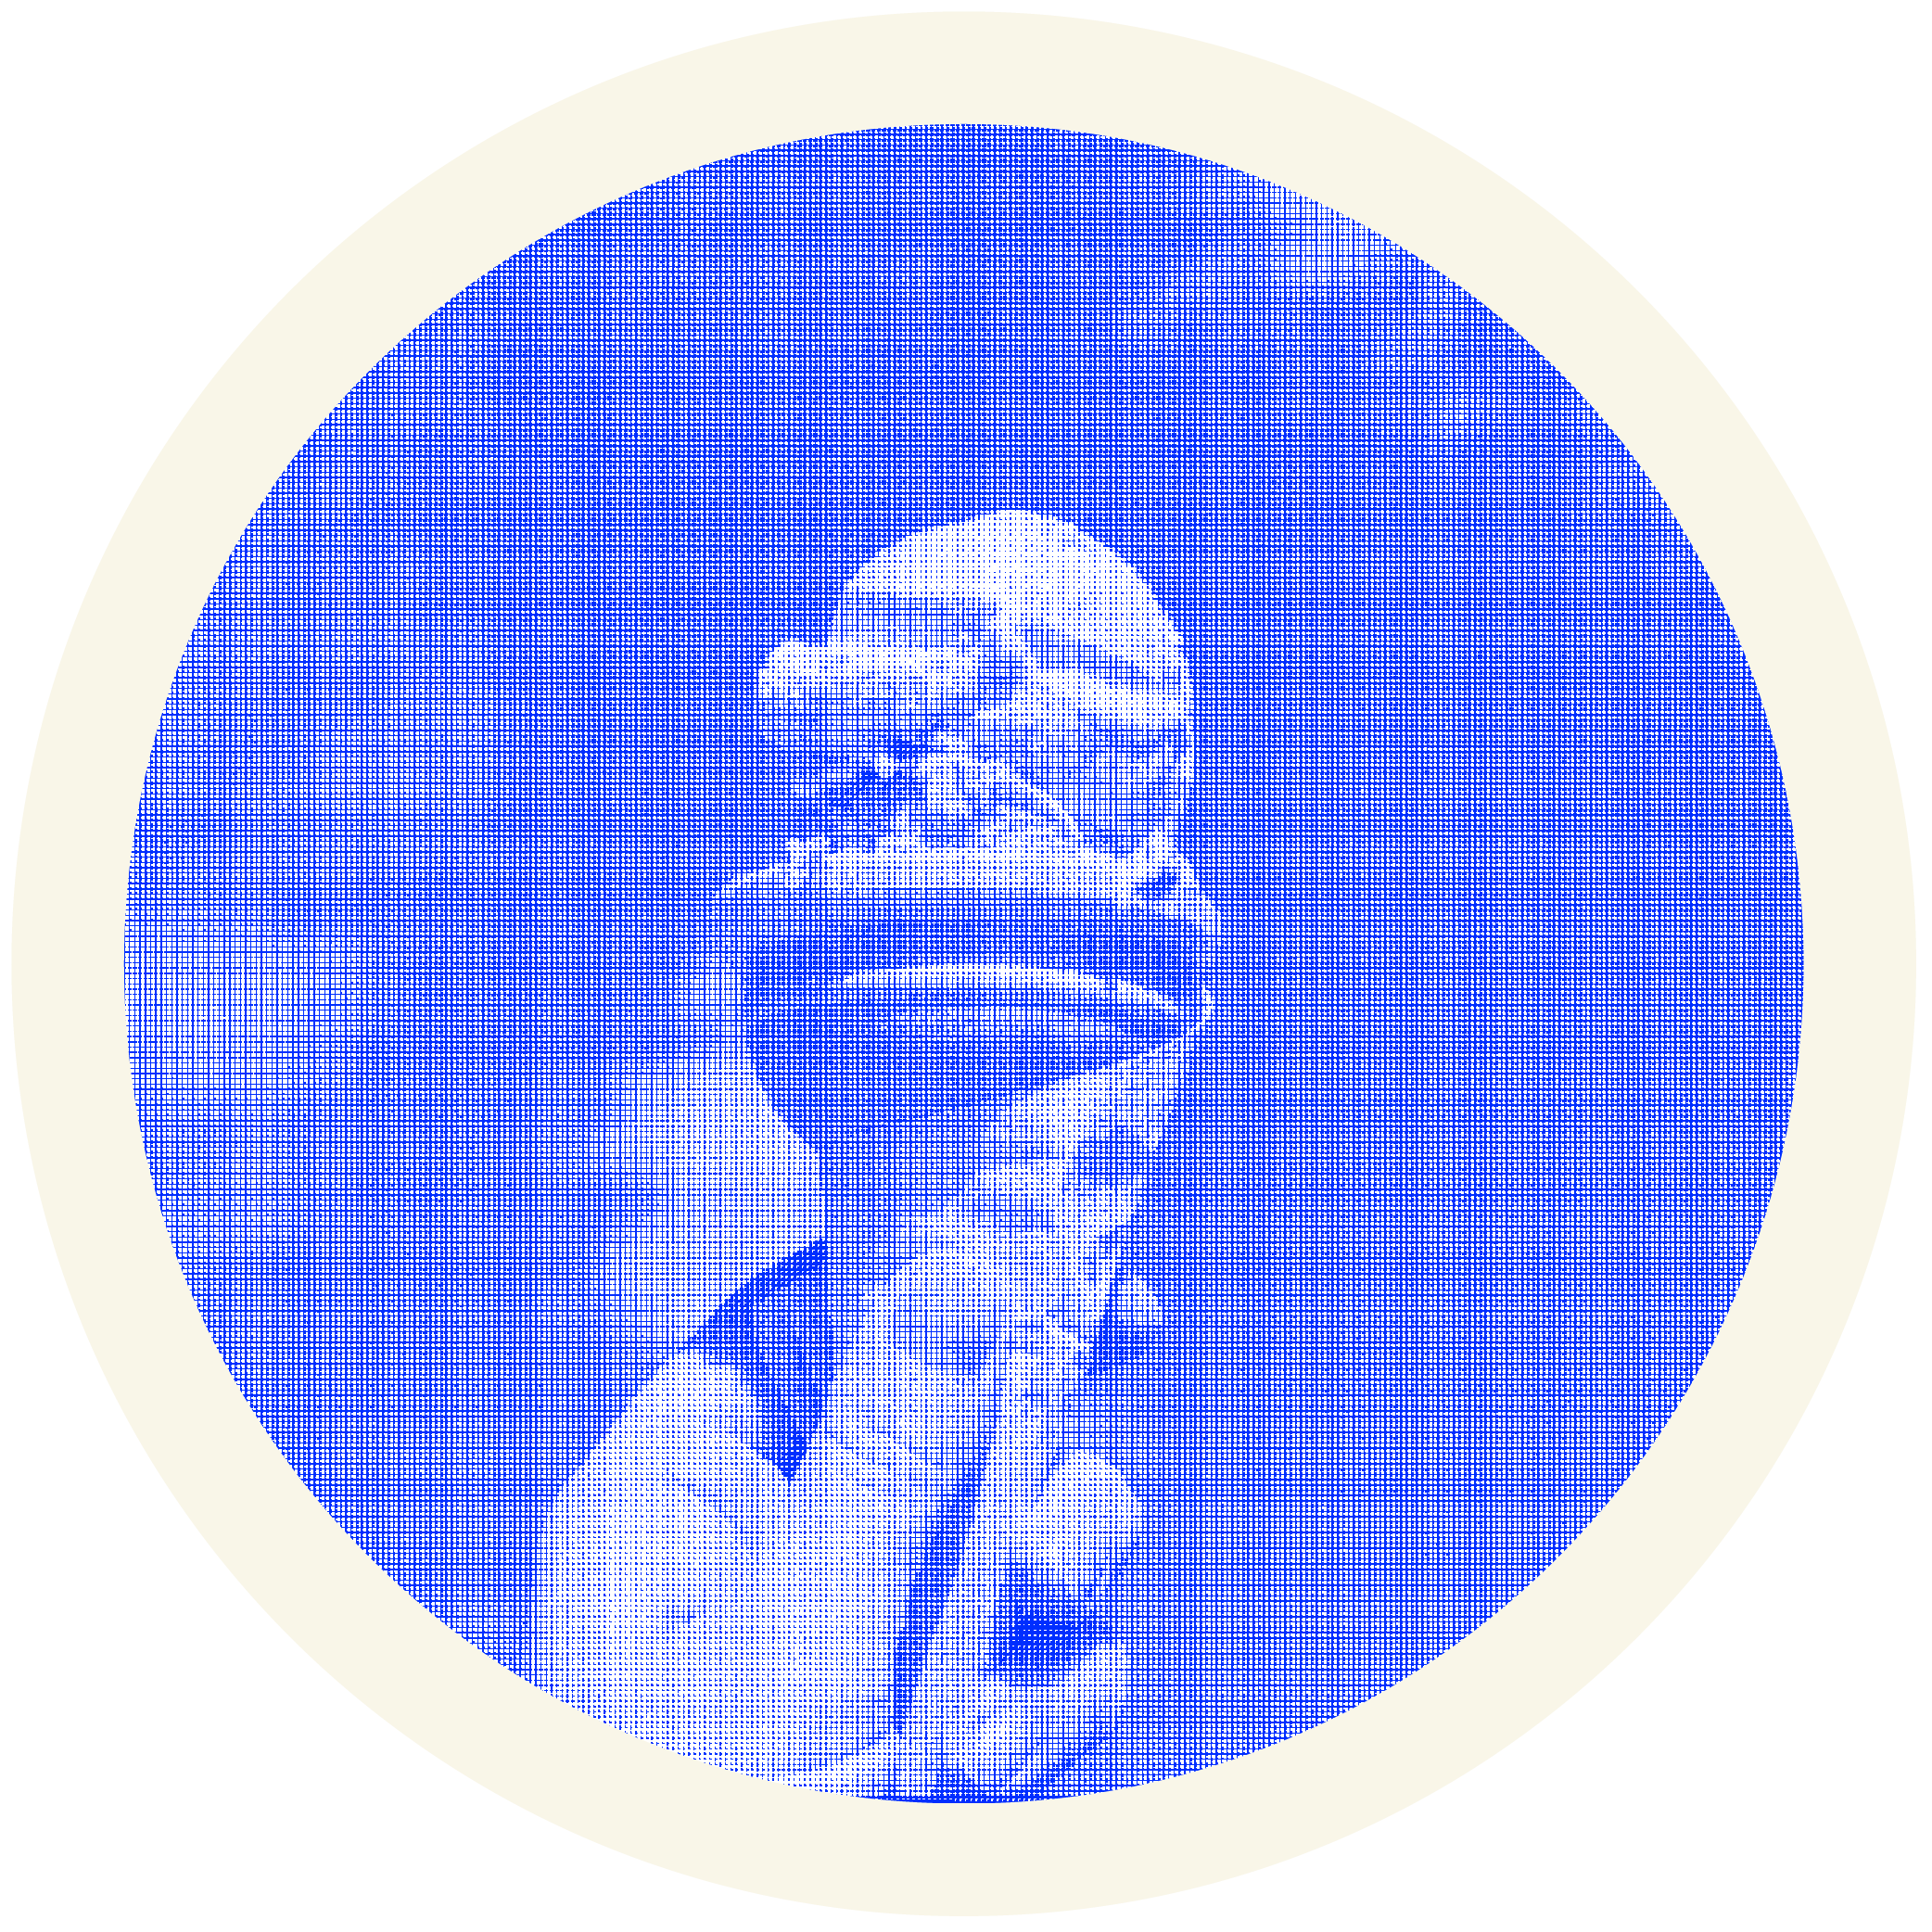 A hand holding an ice cream cone on a sunny day. A tasty treat that can feel like a reward on a hot day.